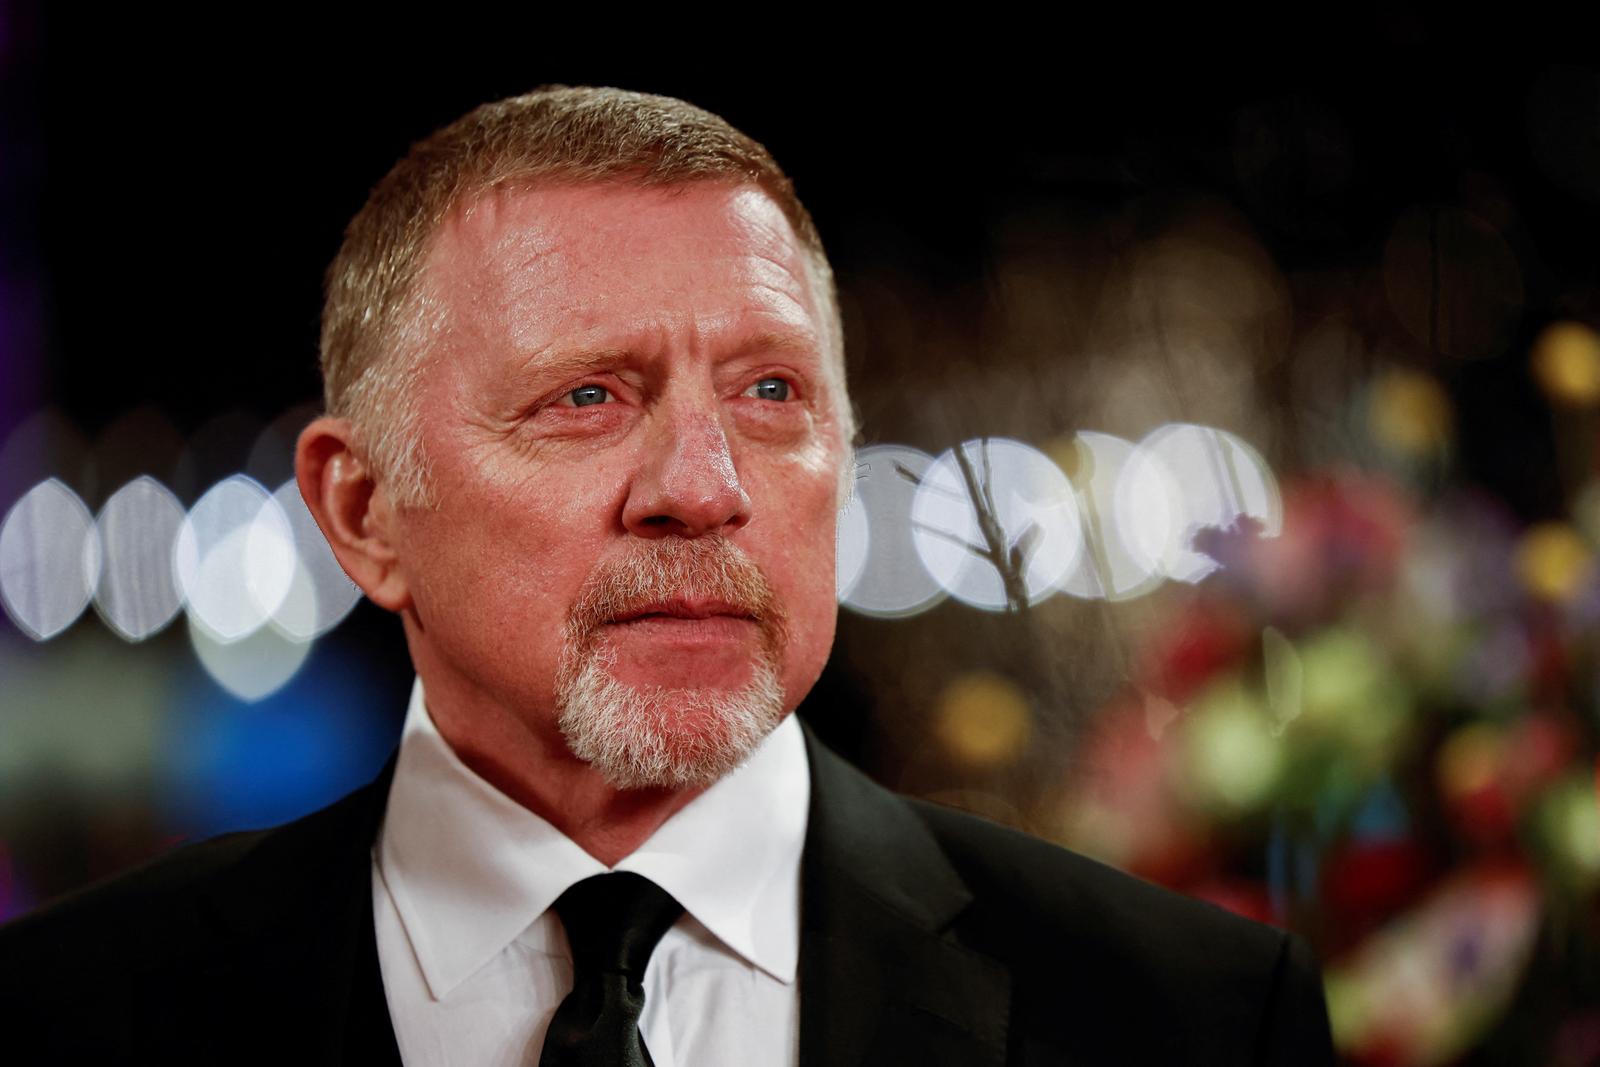 Former tennis player Boris Becker attends the screening of the documentary 'Boom! Boom! The World vs. Boris Becker' at the 73rd Berlinale International Film Festival in Berlin, Germany, February 19, 2023. REUTERS/Michele Tantussi Photo: MICHELE TANTUSSI/REUTERS